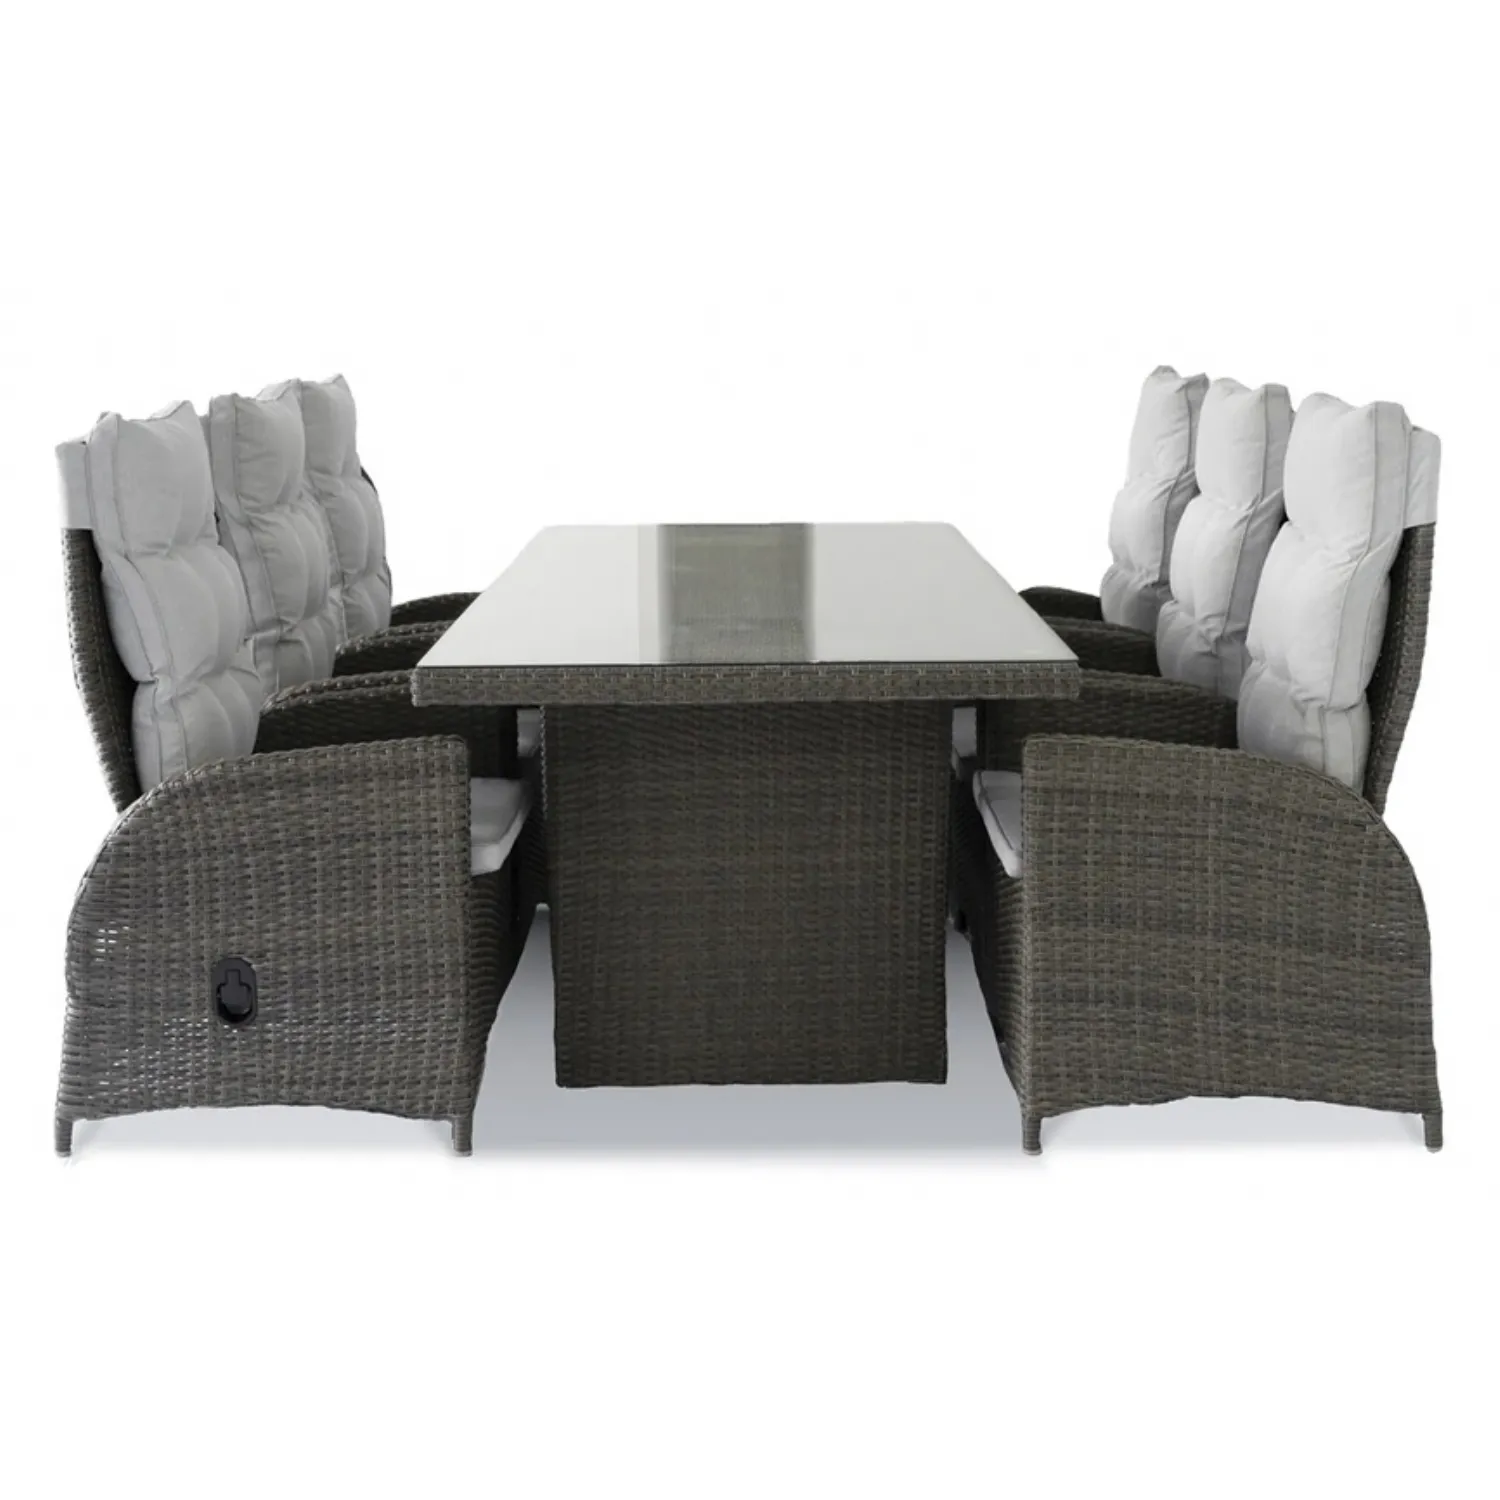 Grey Rattan 2M Dining Table, 6 Recliner Chairs + Free Swivel Chair